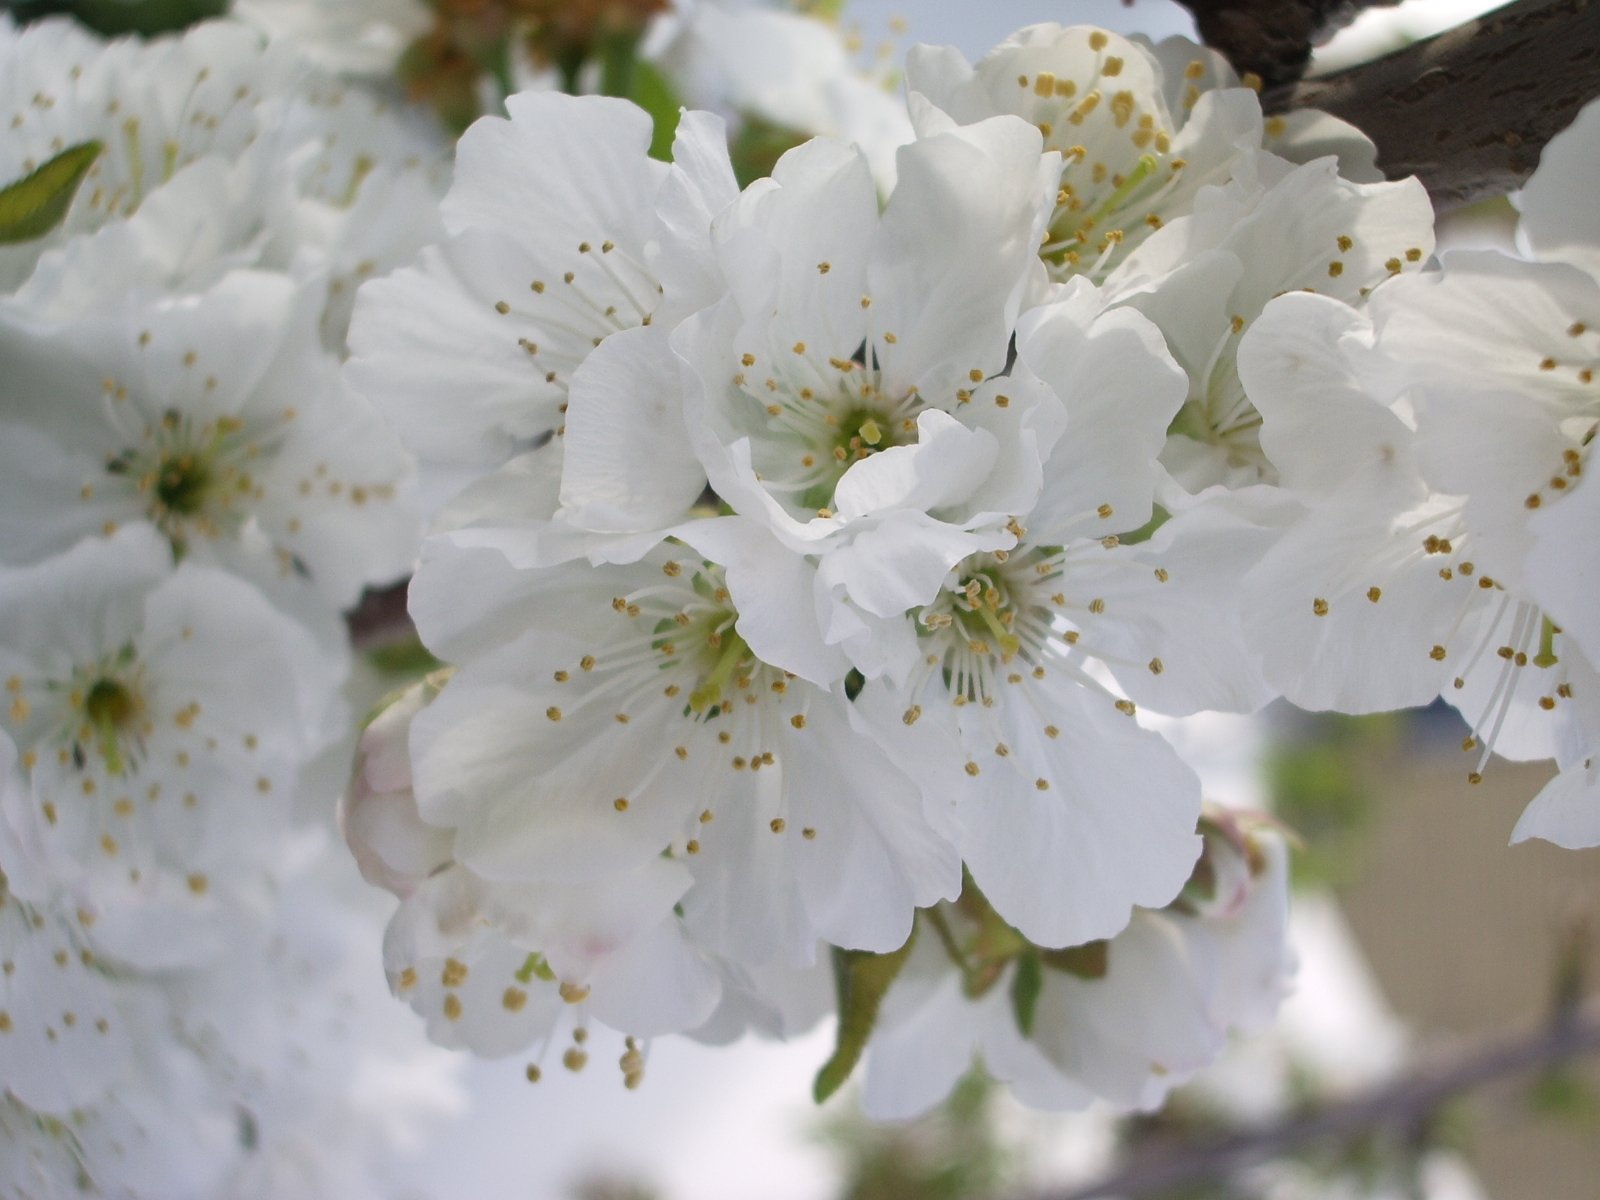 a blossomed apple tree is shown in full bloom